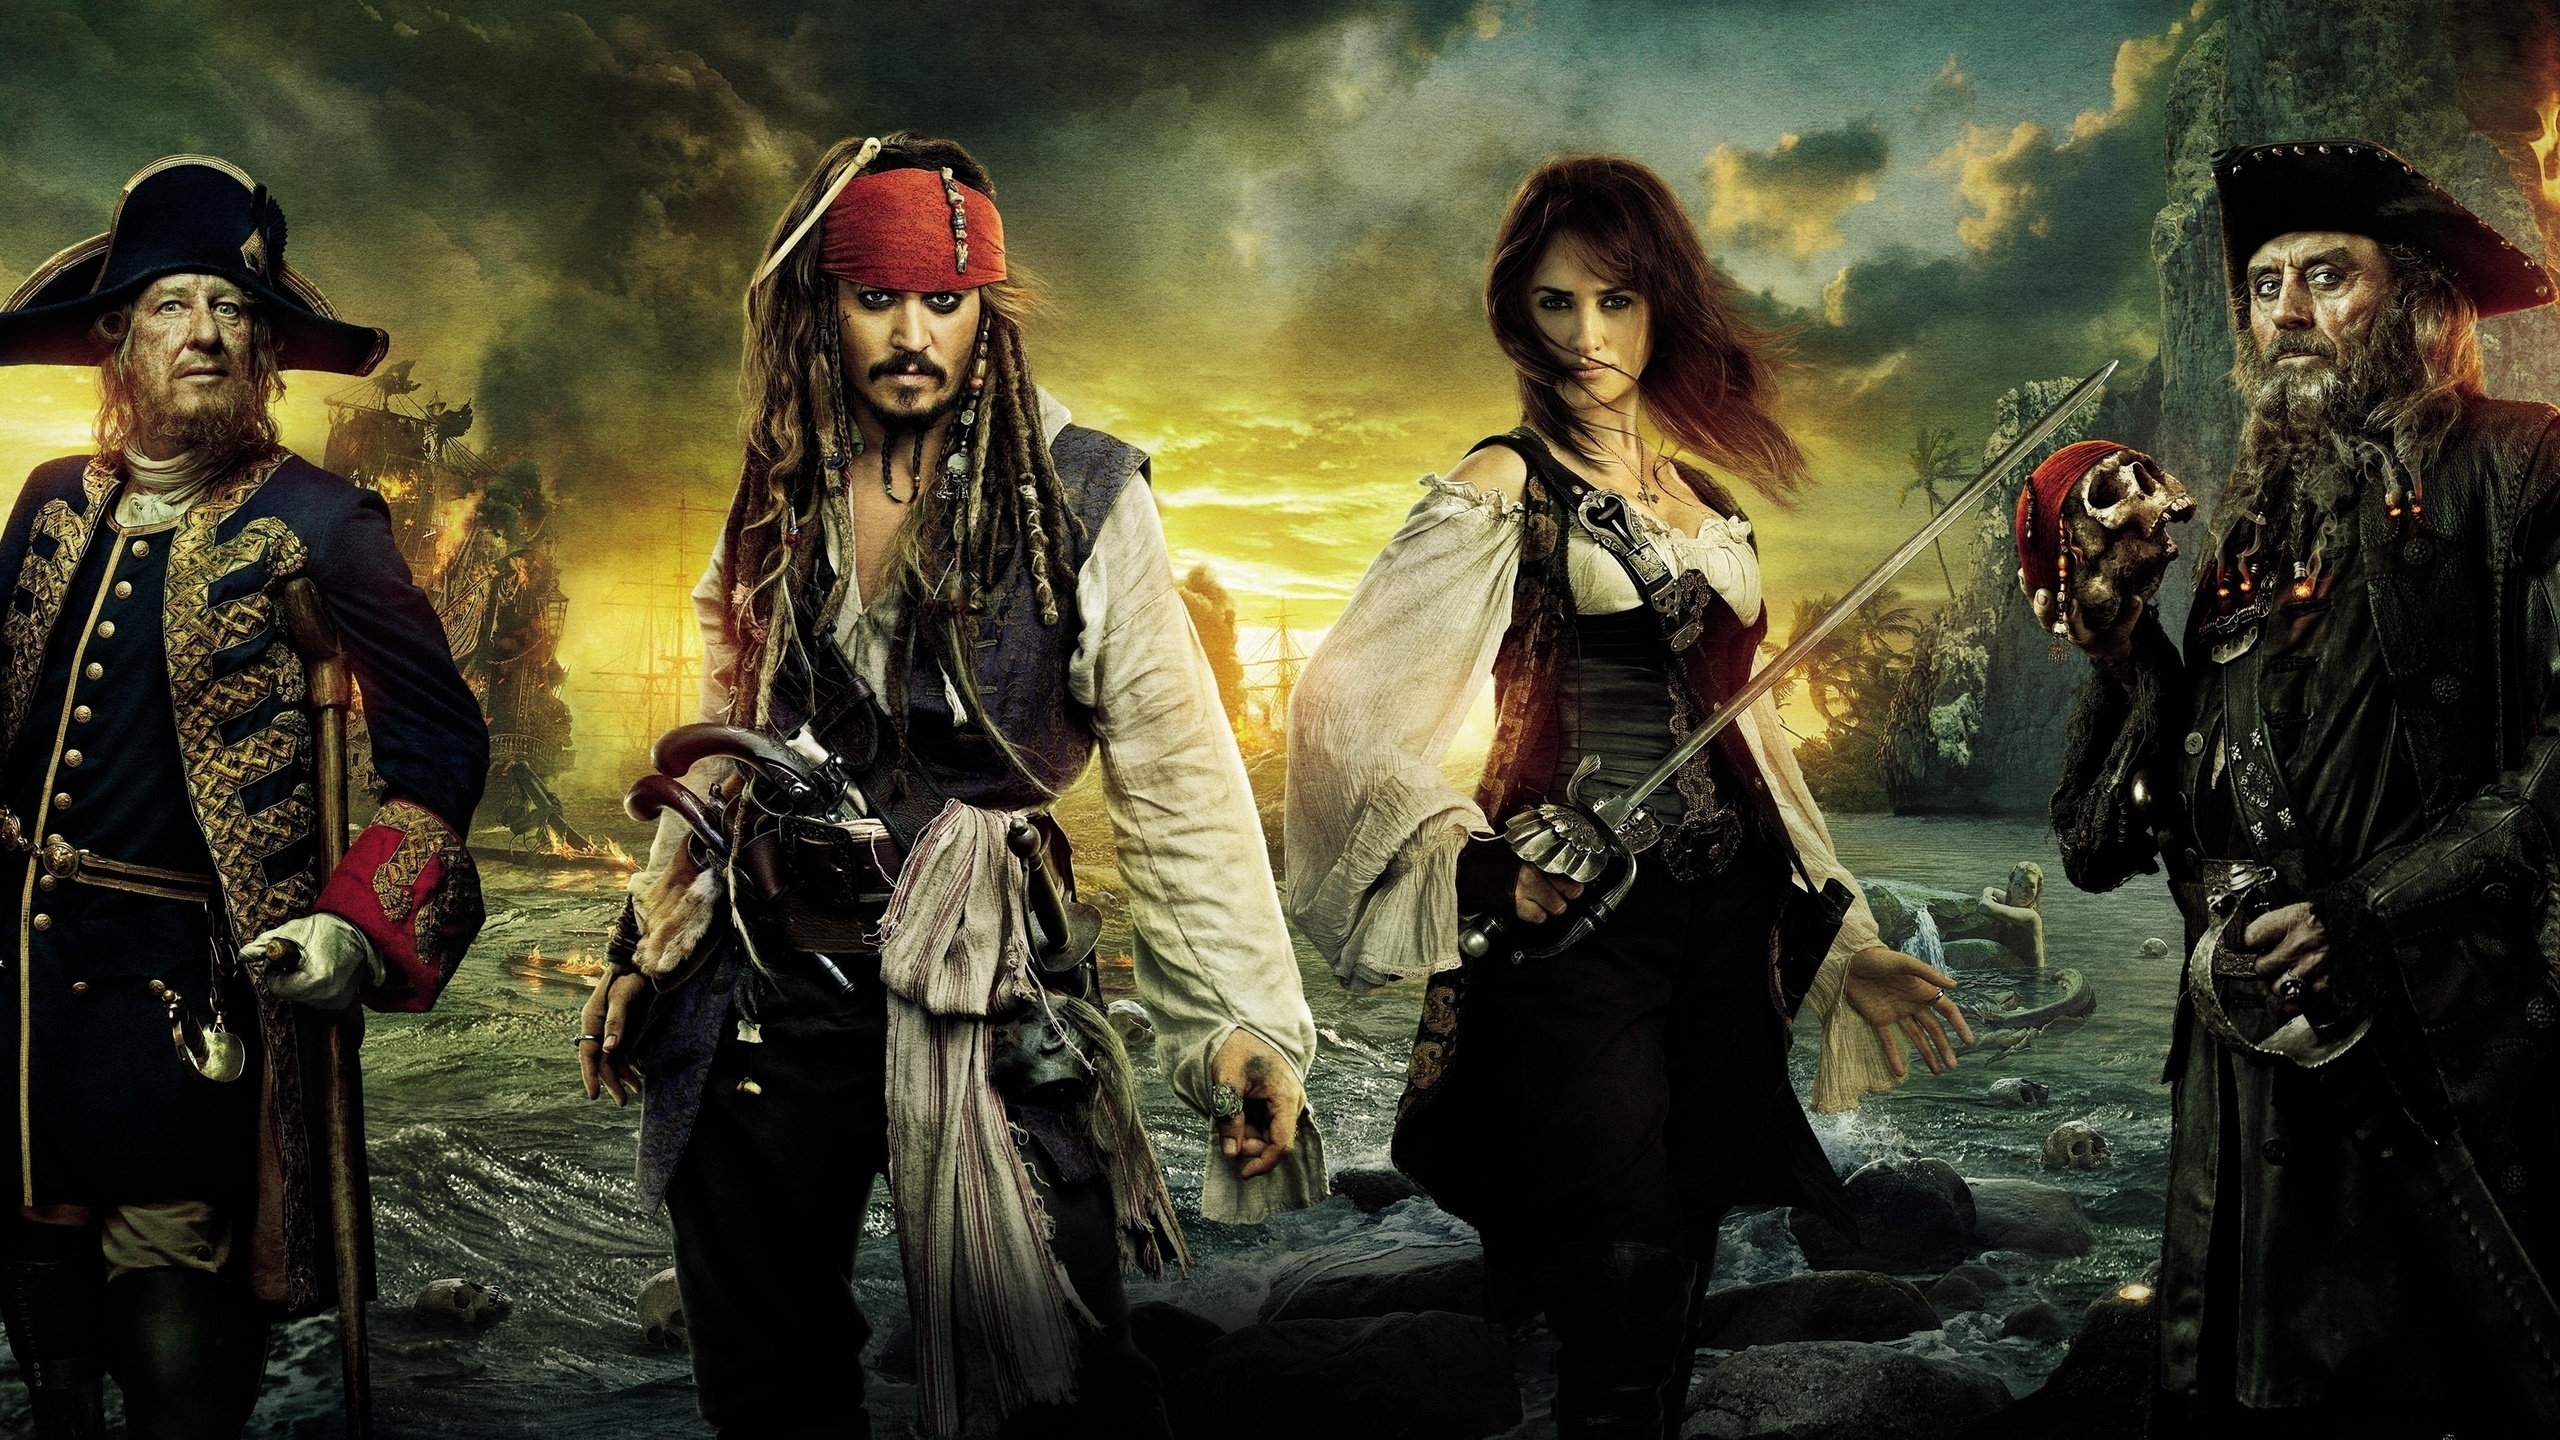 Pirates of the Caribbean Characters for 2560x1440 HDTV resolution